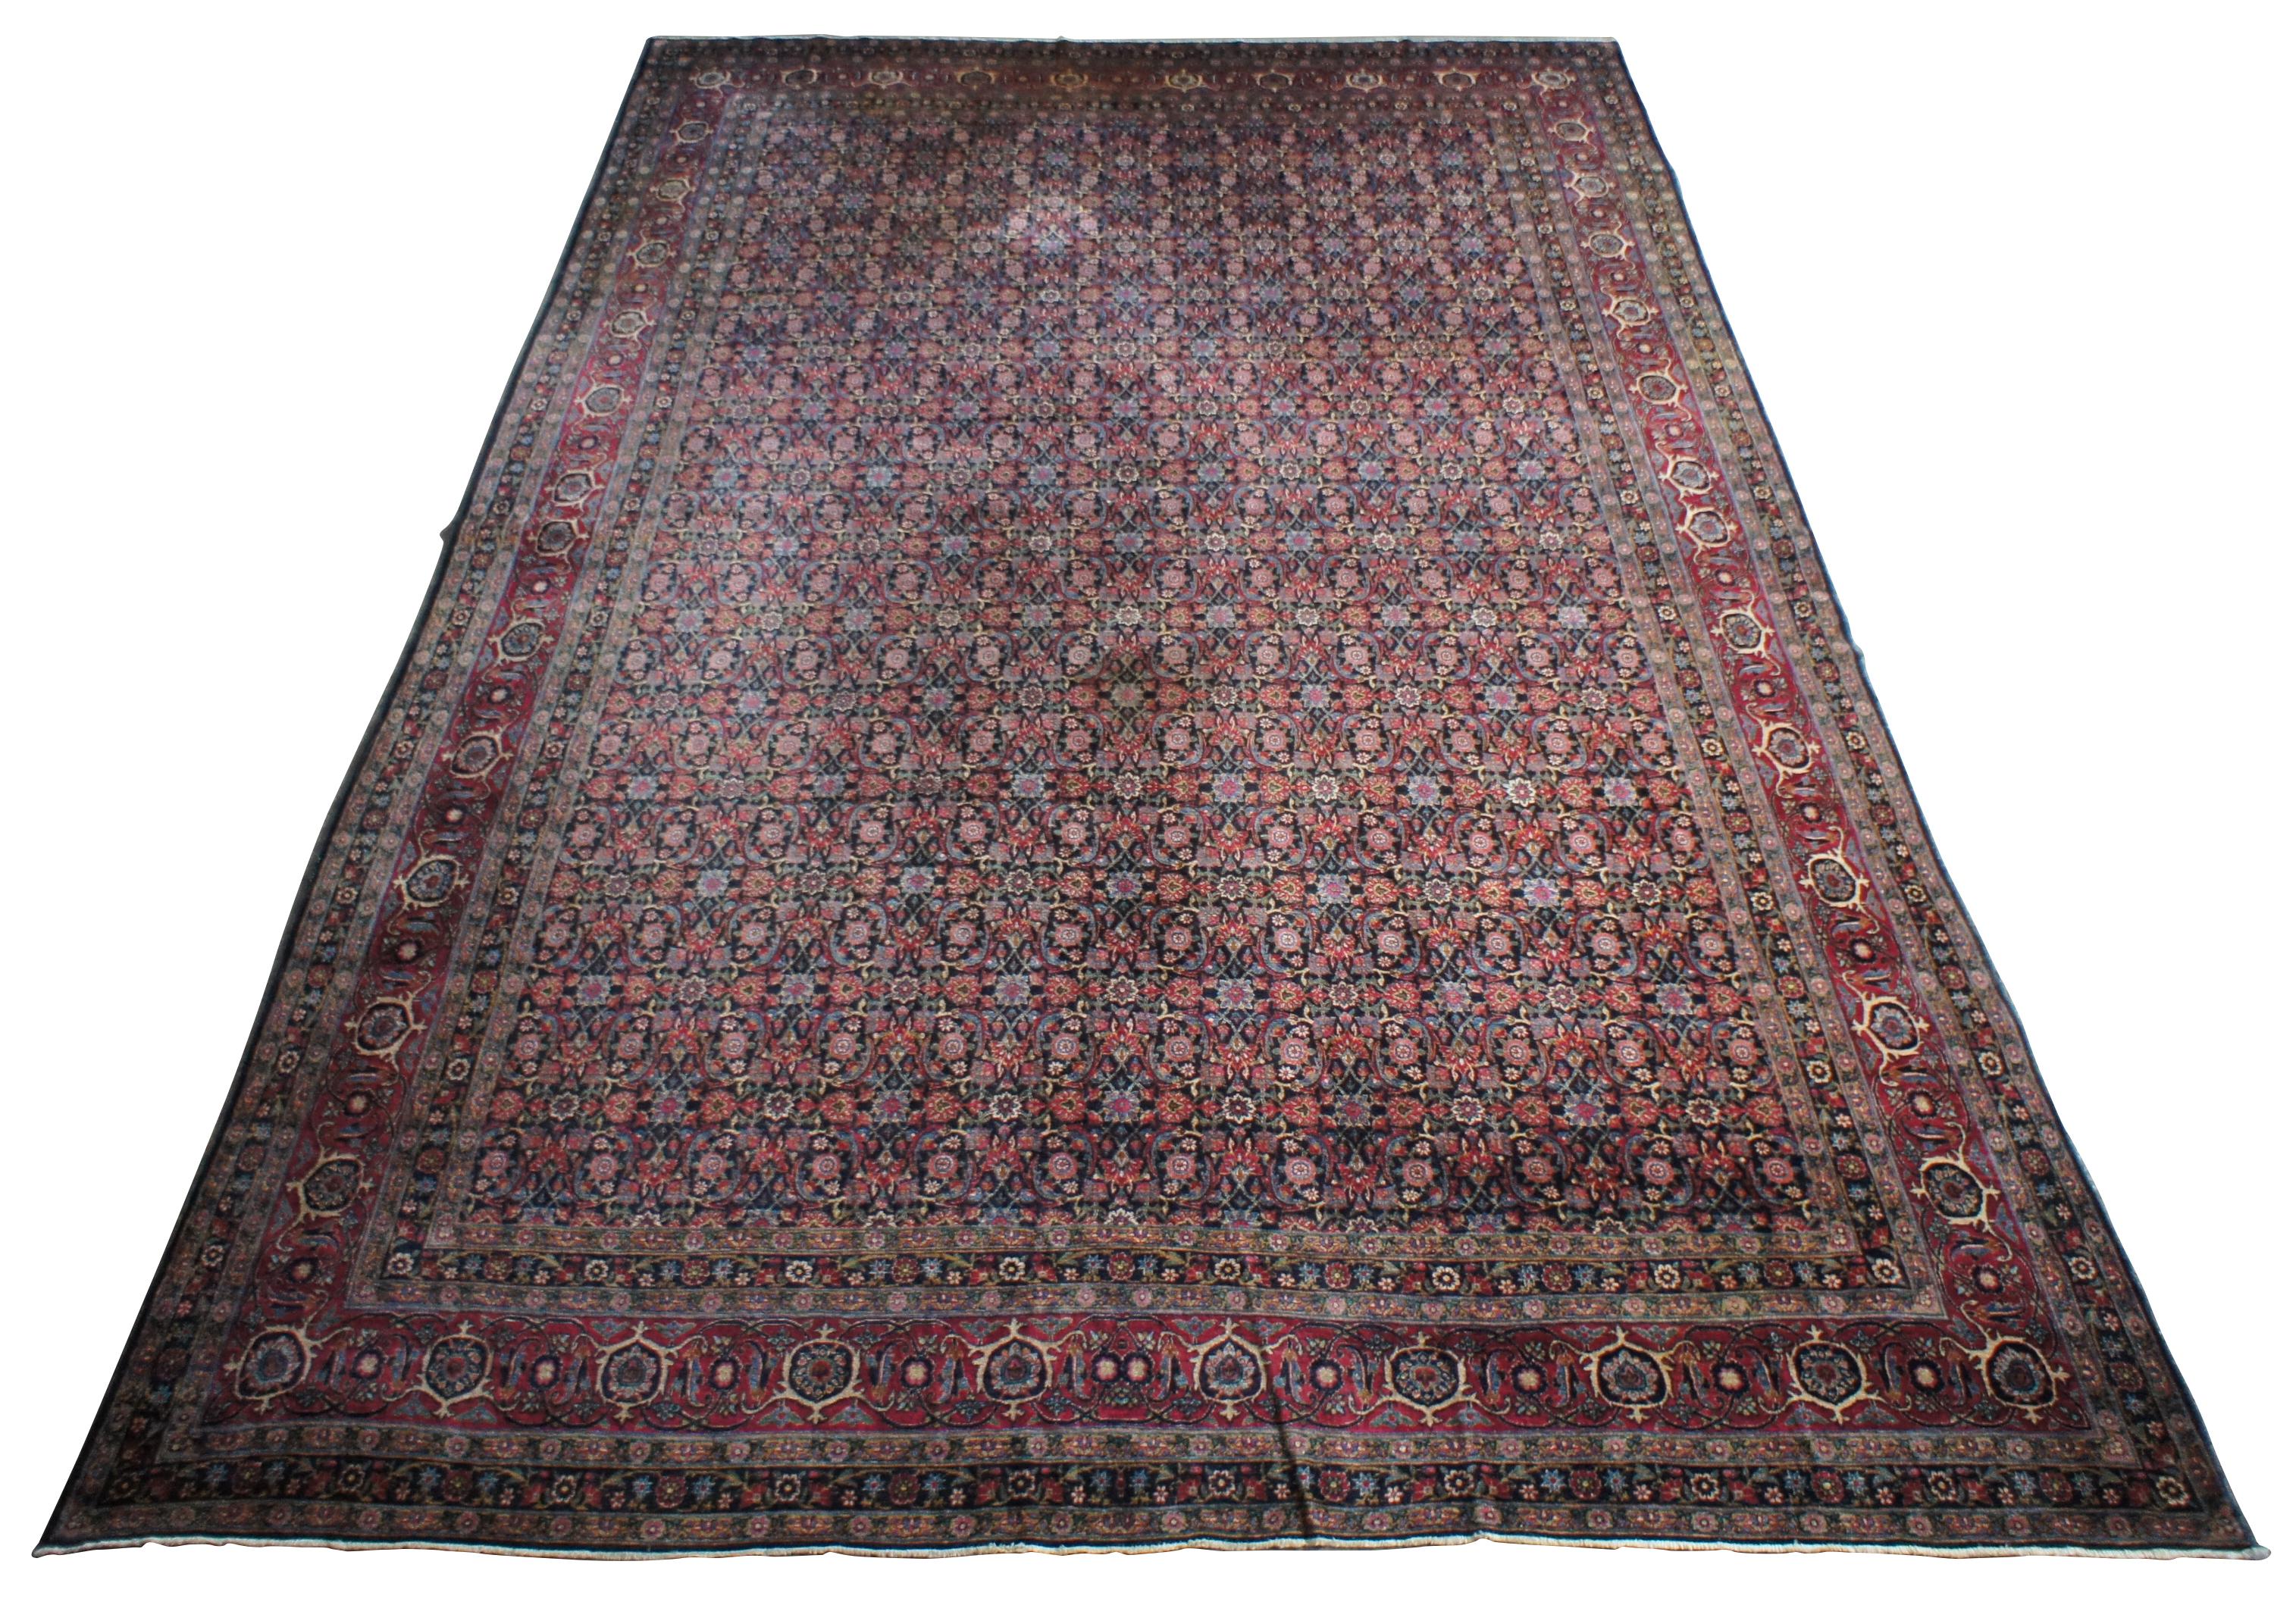 Antique silk and wool tabriz rug or carpet. Features a field of reds and blues, patterned flowers and floral motif, and a triple boarder. Approx 225 knots per square inch. Rug came from a German estate and was appraised in the late 20th century